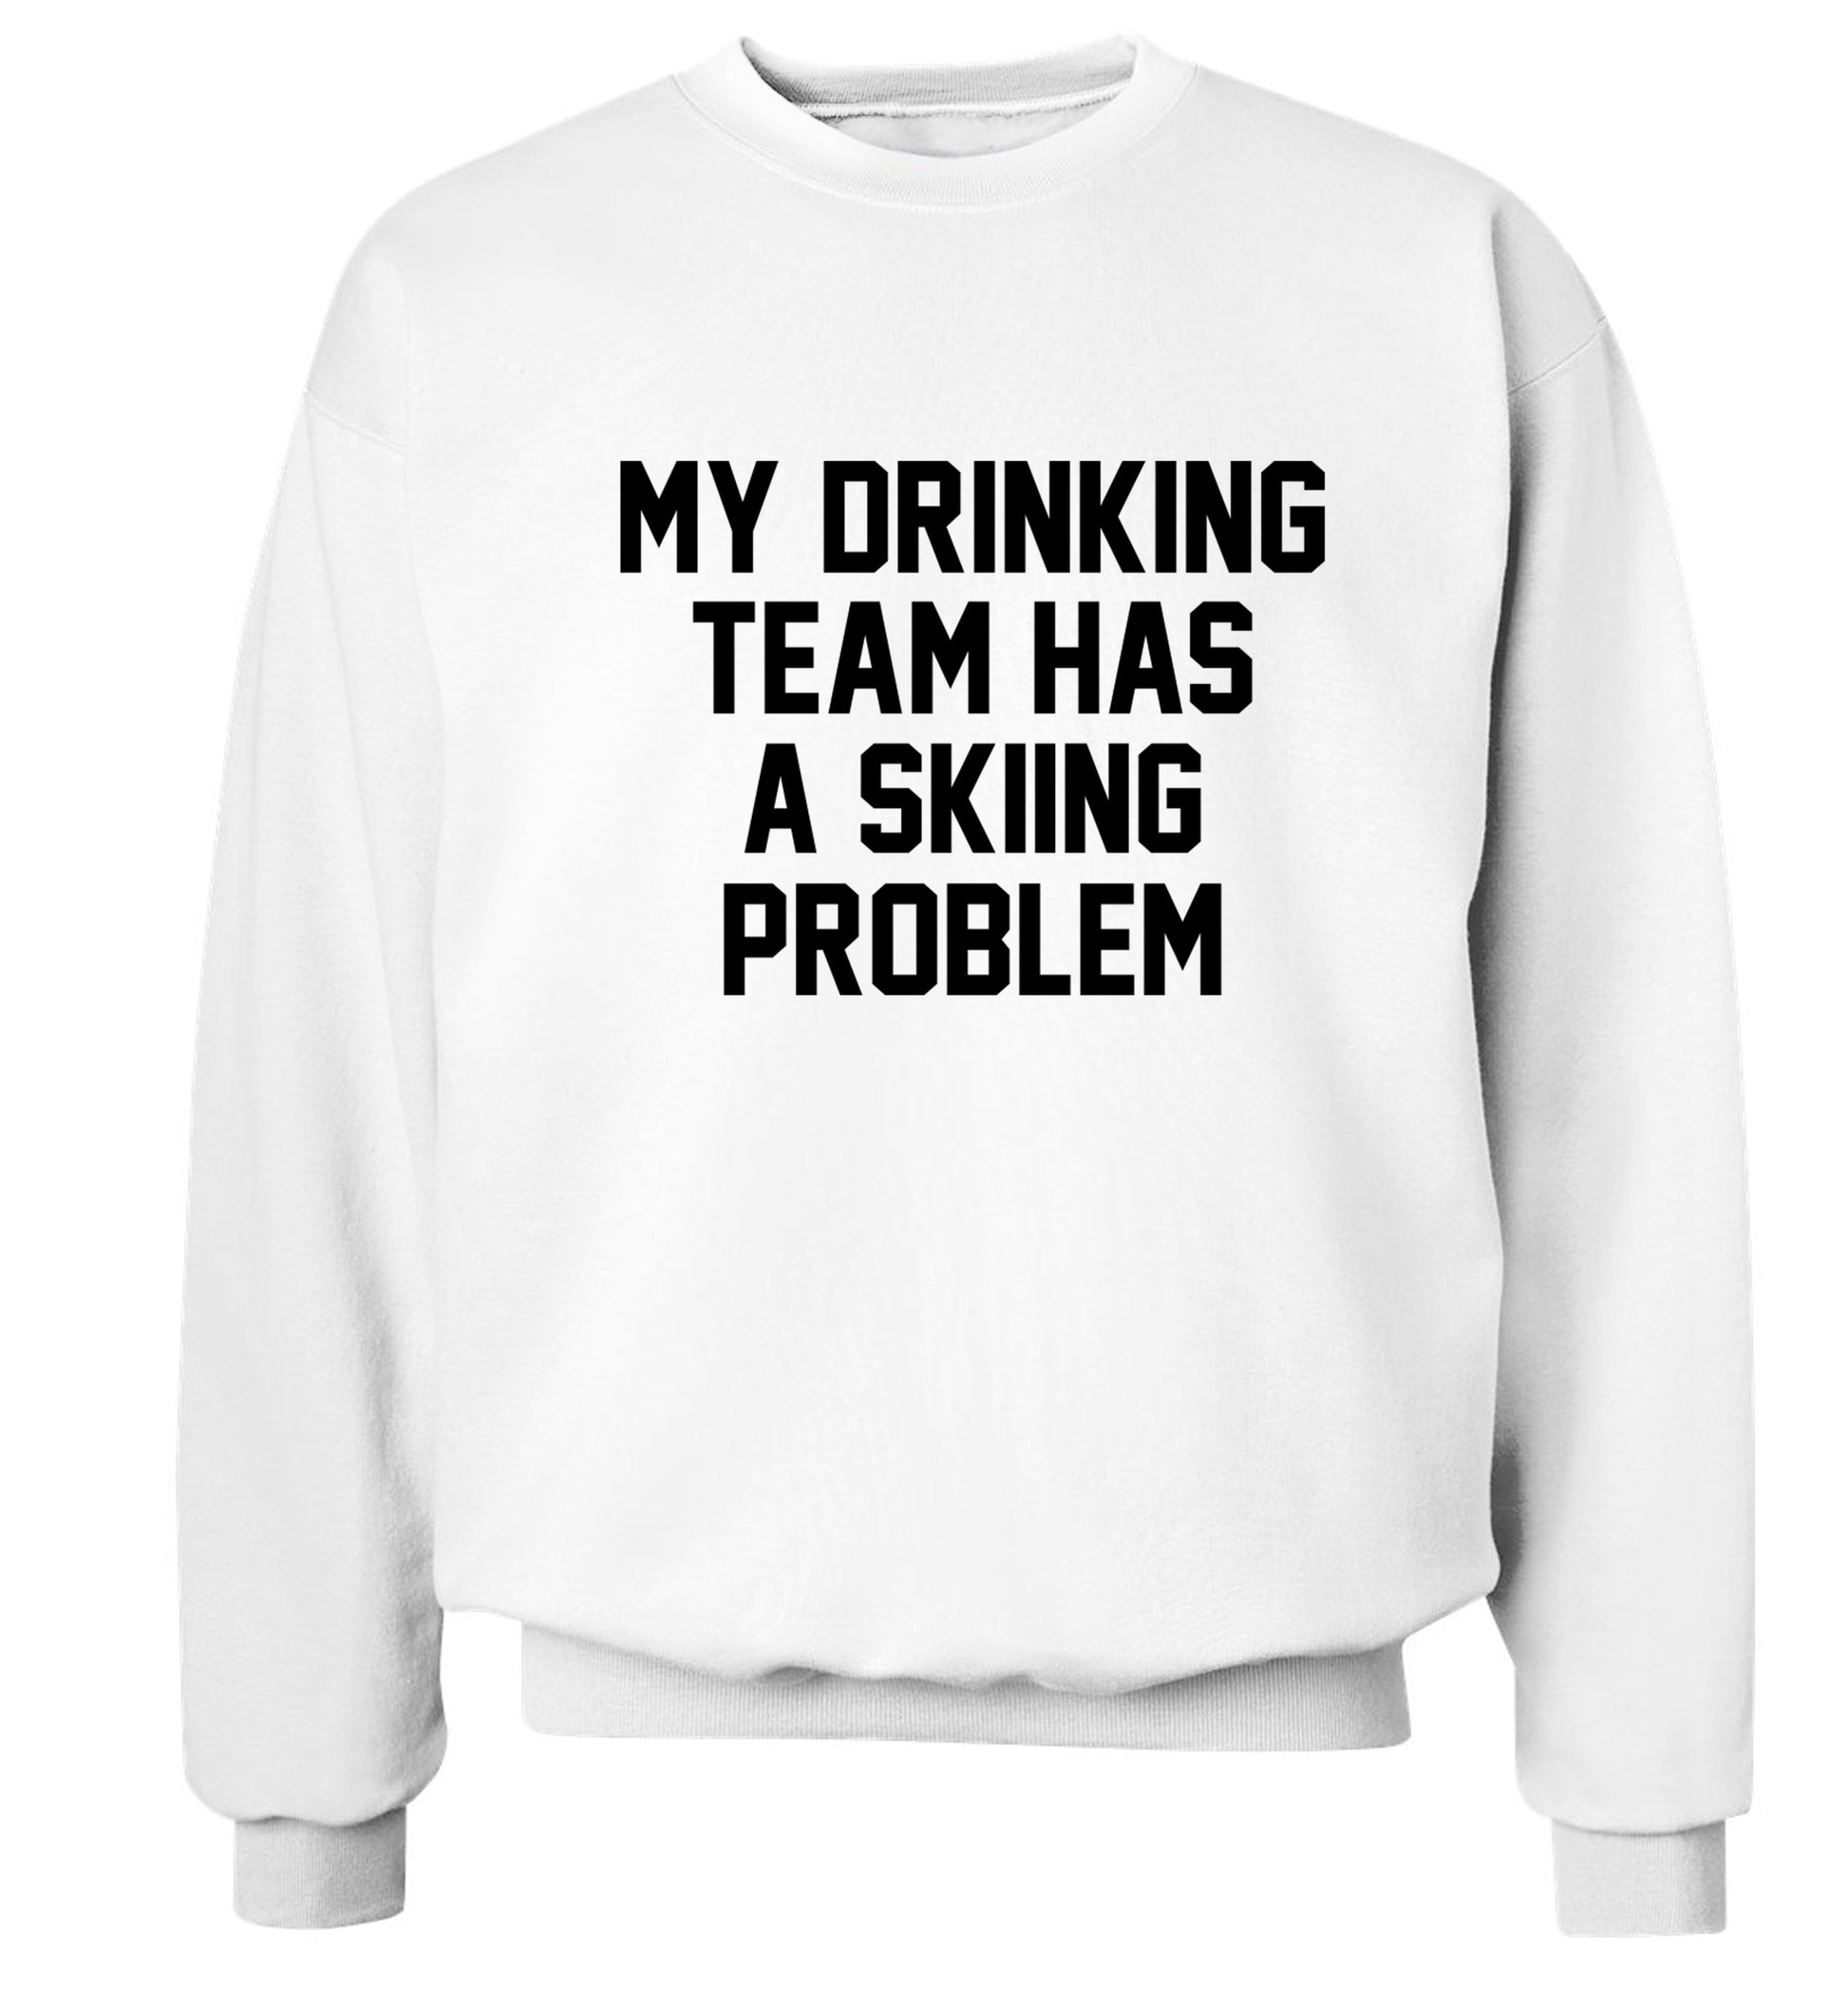 My drinking team has a skiing problem Adult's unisexwhite Sweater 2XL